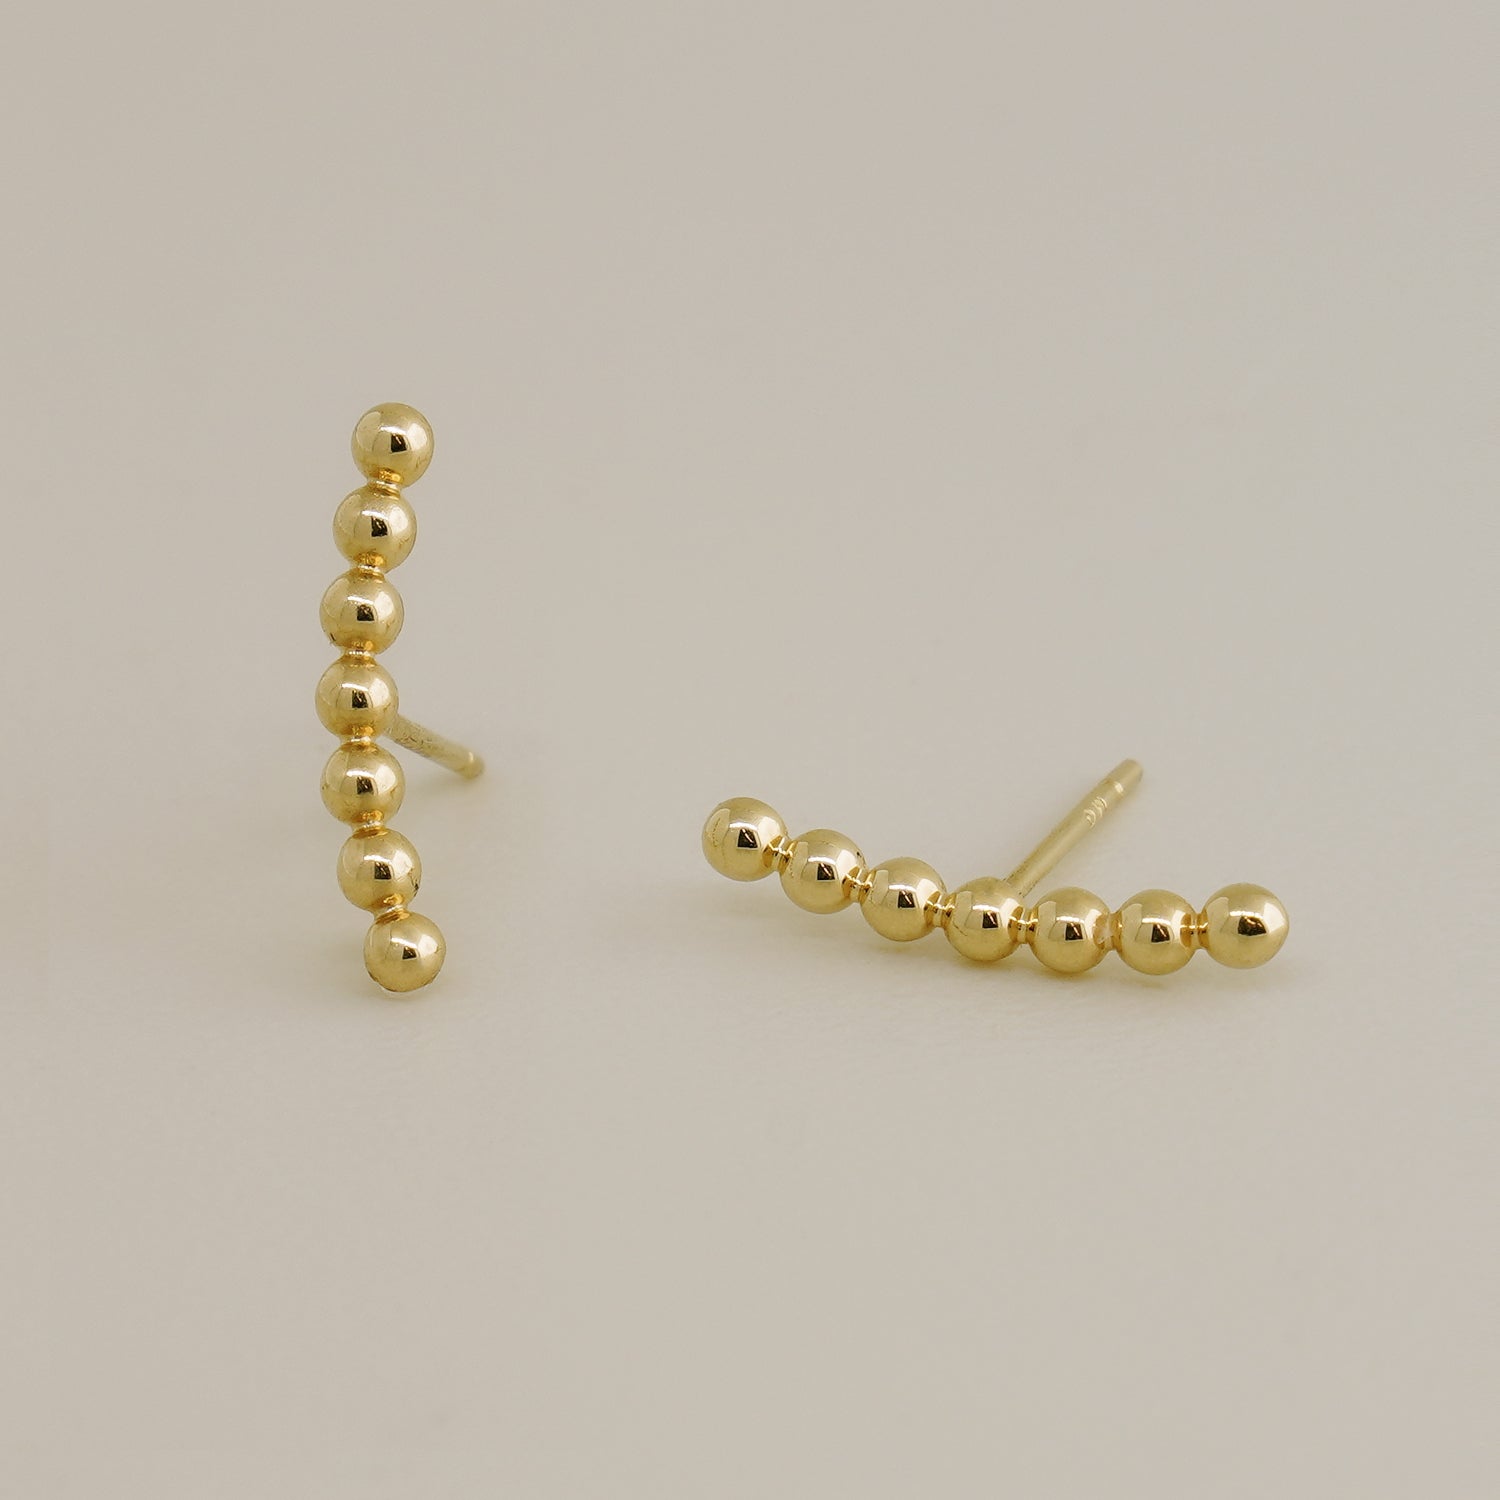 14K Solid Gold Beaded Gold Climber Stud Earrings - Anygolds 